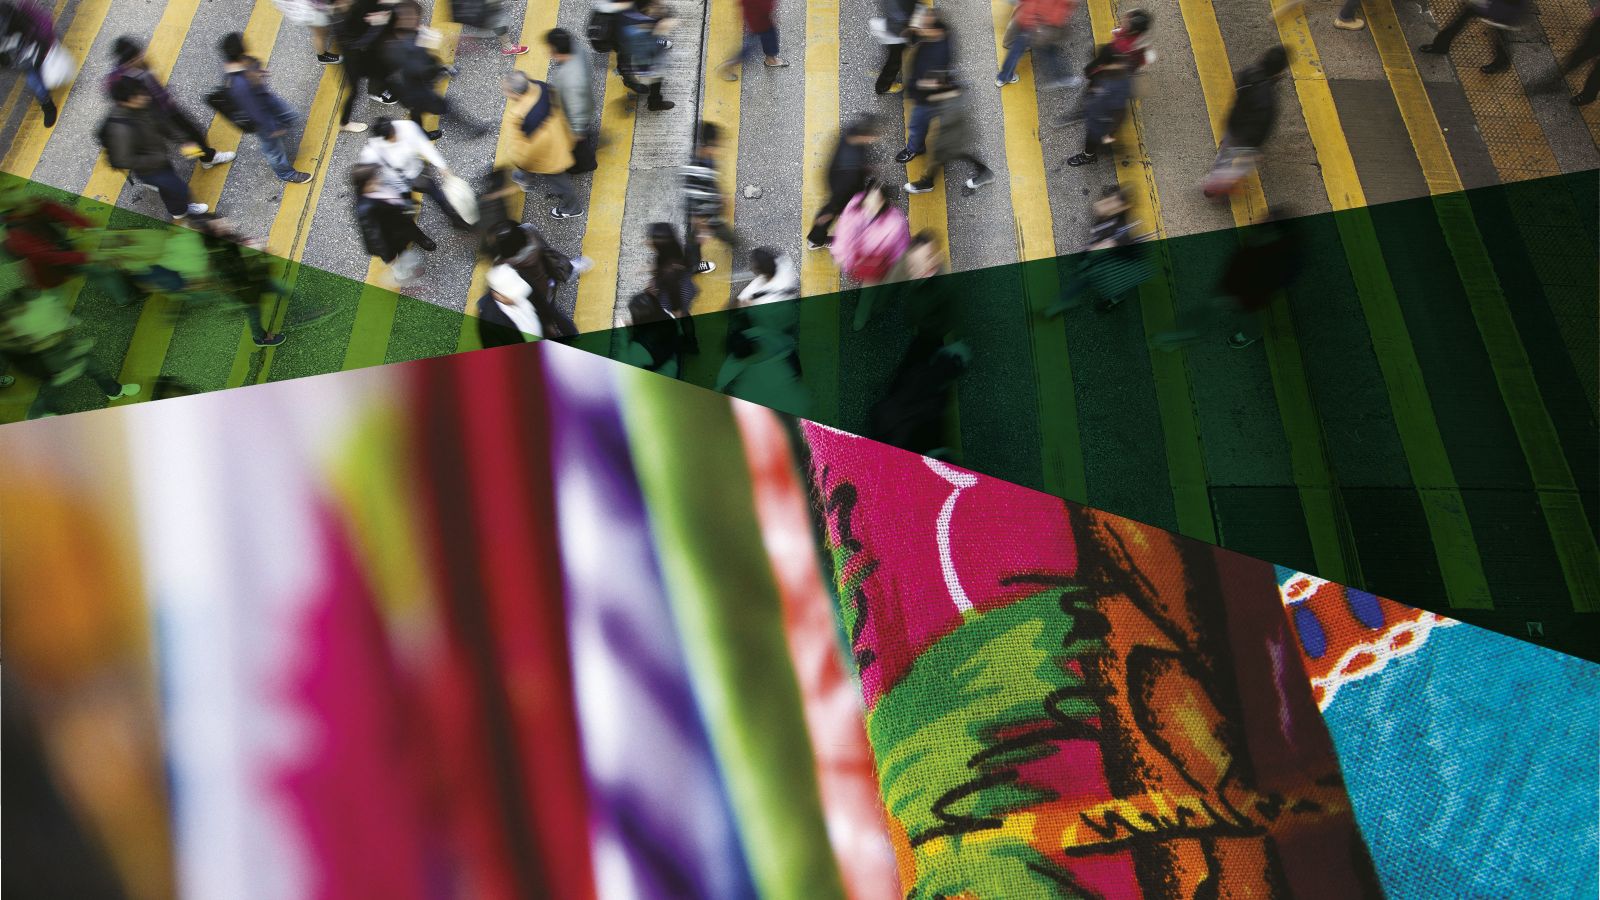 Banner - people crossing a road juxtaposed with an image of rolls of fabric.